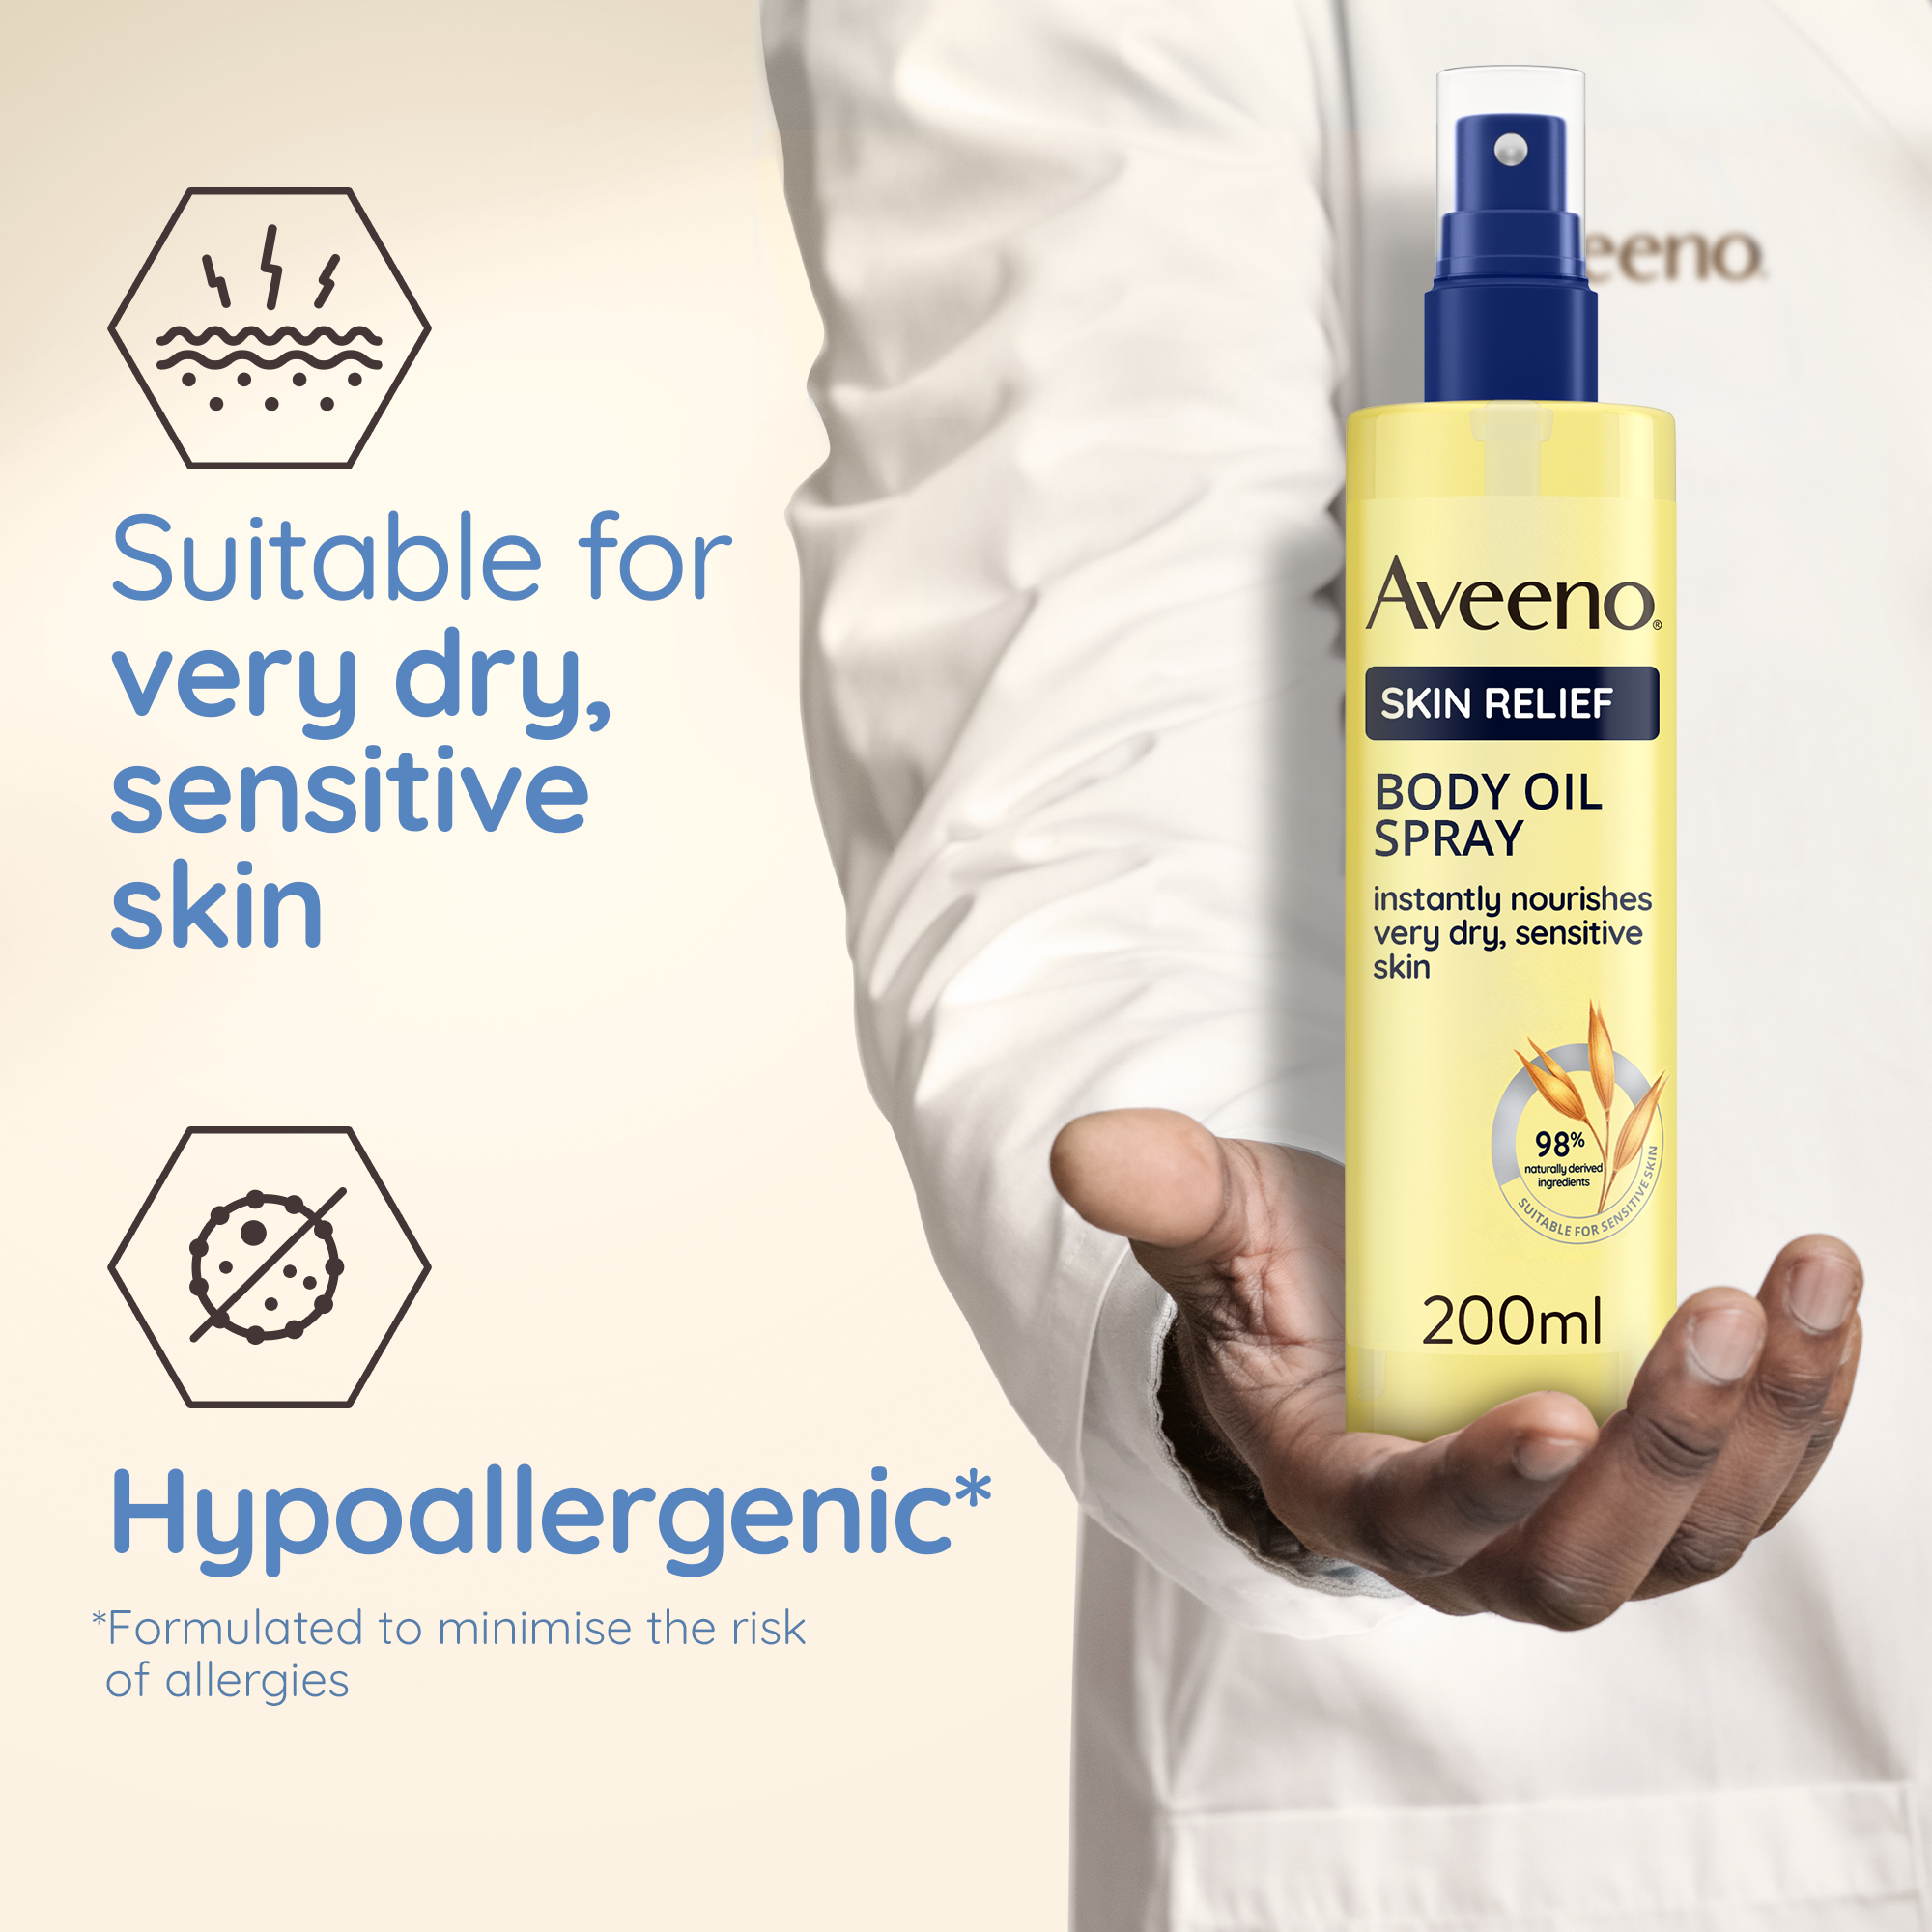 Suitable for very dry, sensitive skin and hypoallergenic